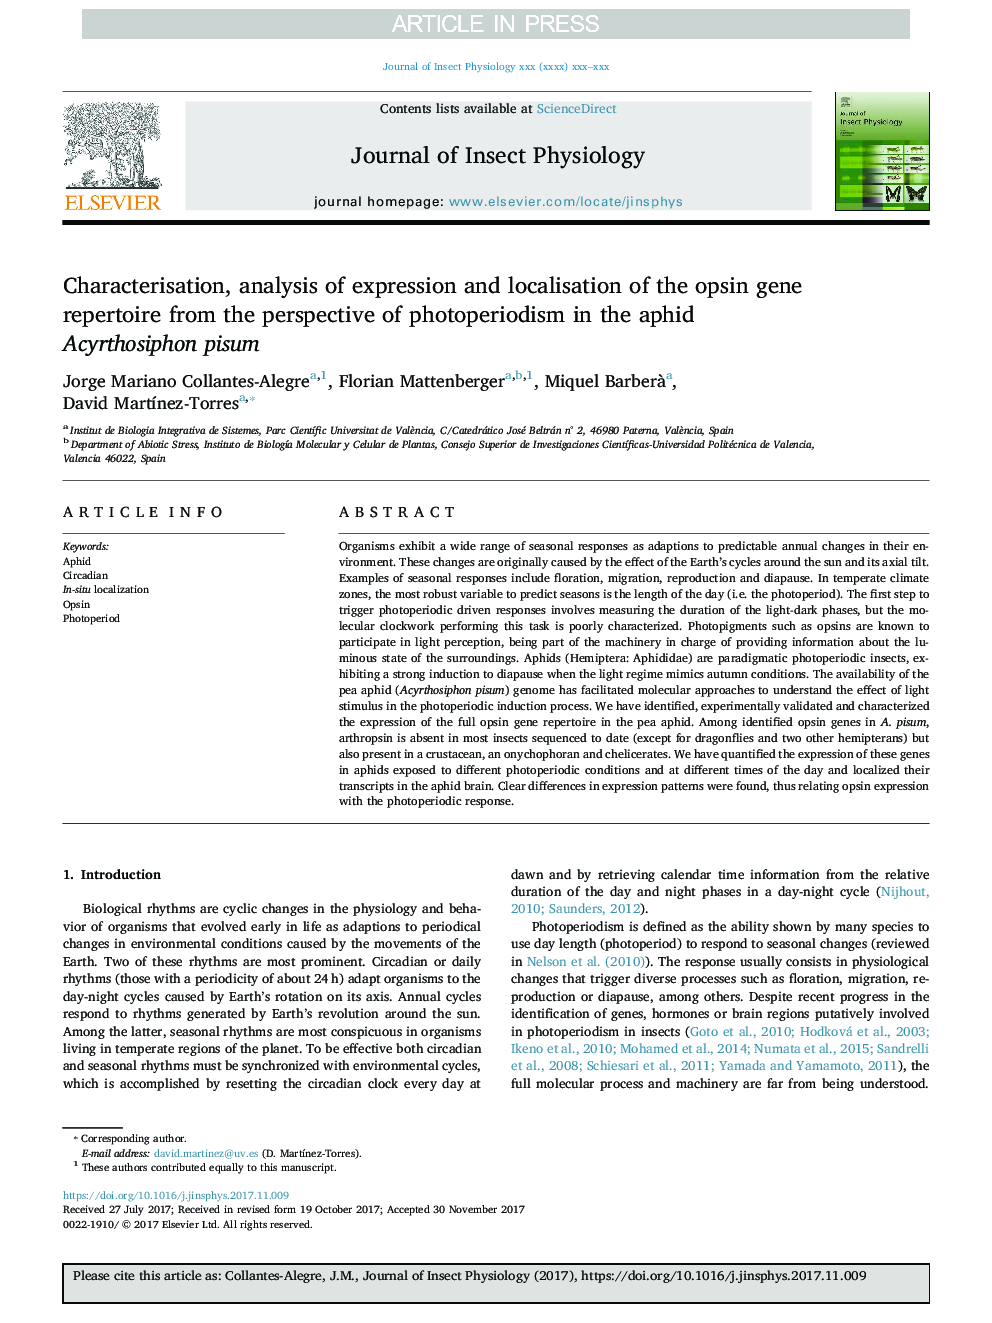 Characterisation, analysis of expression and localisation of the opsin gene repertoire from the perspective of photoperiodism in the aphid Acyrthosiphon pisum